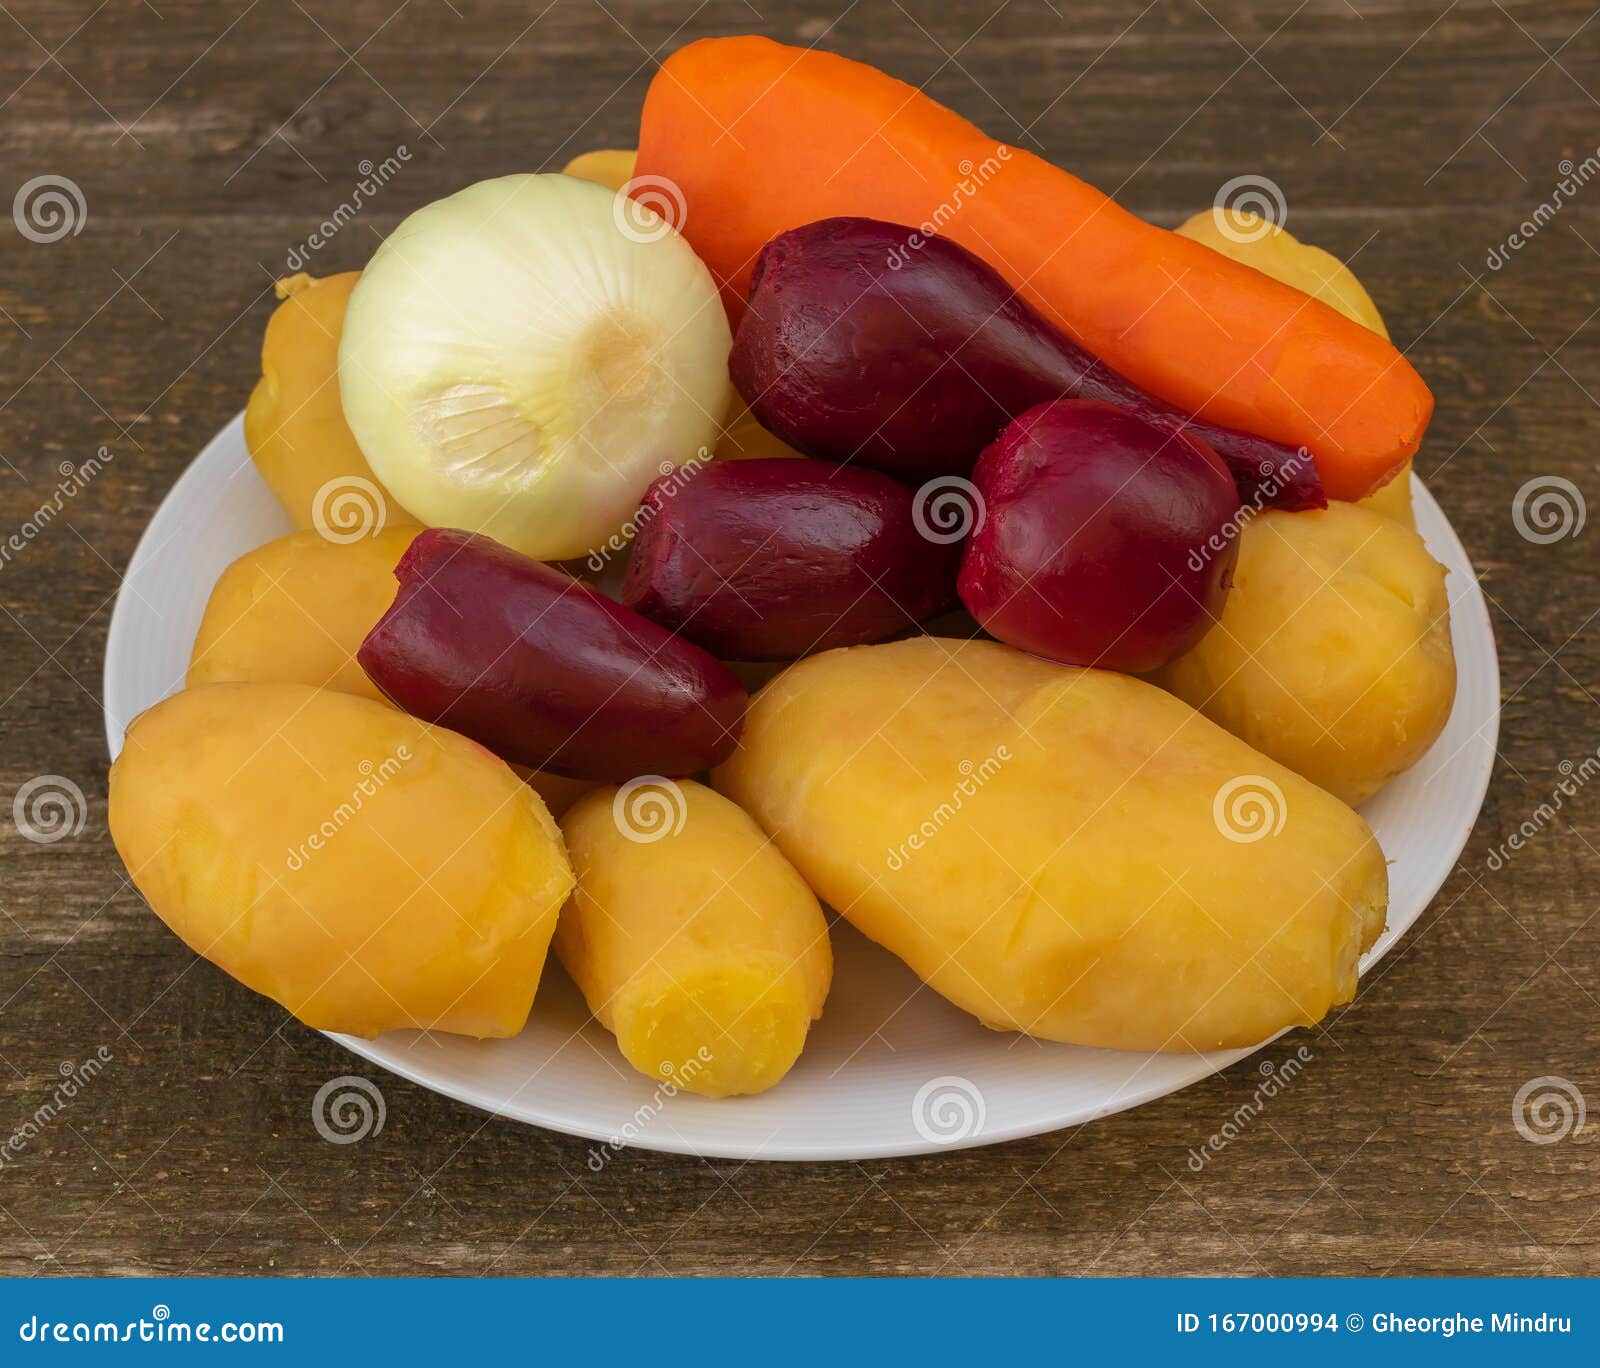 Salad in the Cooking Process. Ingredients: Boiled Potatoes, Boiled Carrots,  Red Beet., Onions. Health Benefits Concept Stock Photo - Image of beets,  preparation: 167000994